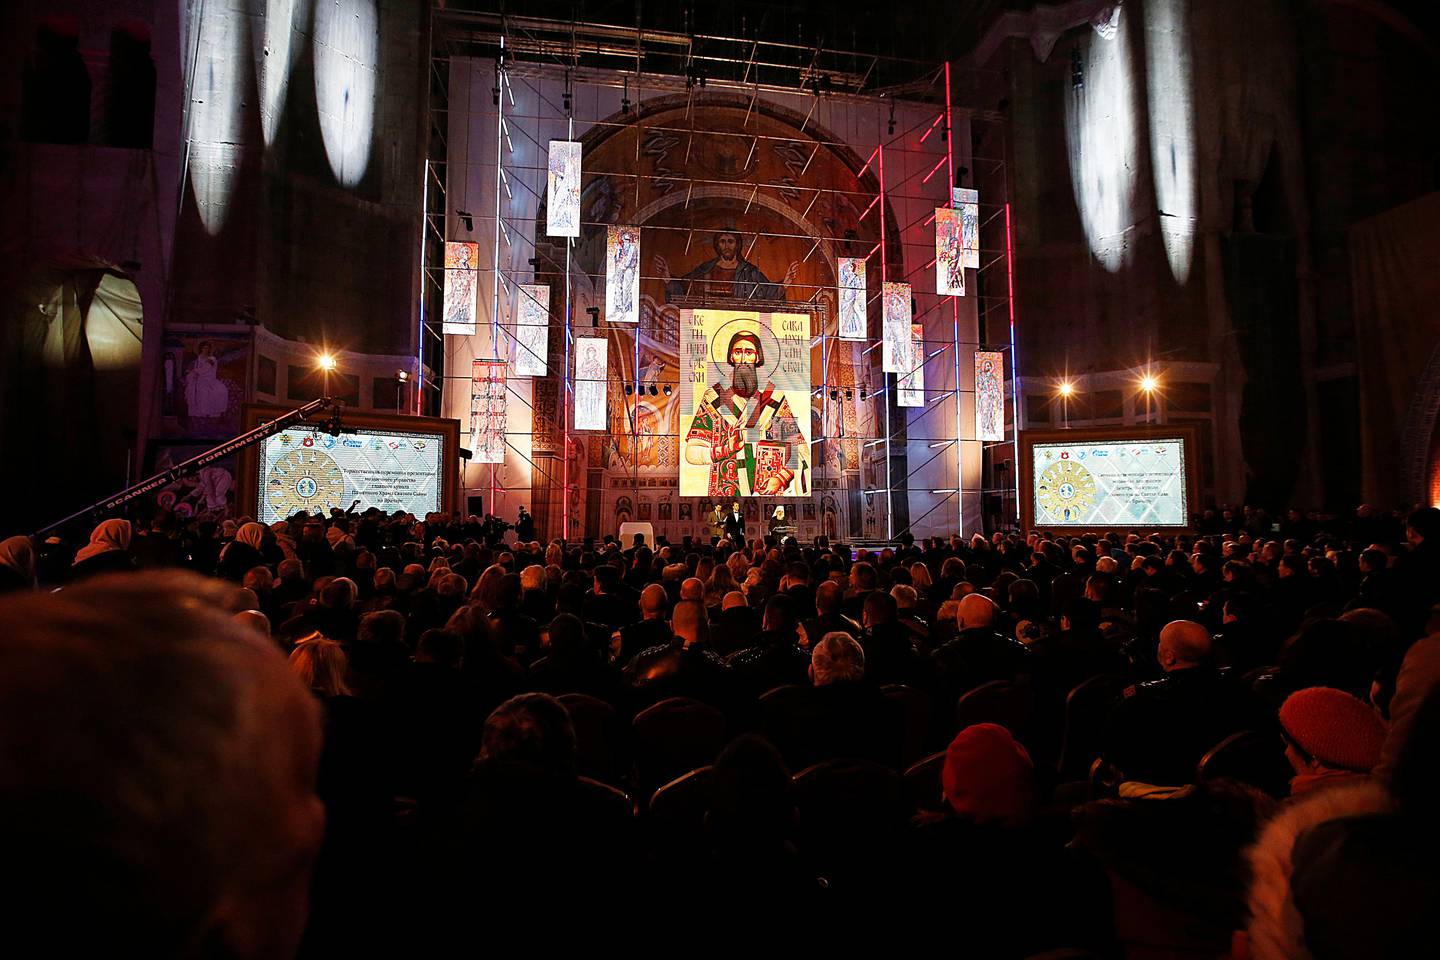 People attend a ceremony unveiling a new mosaic in the St. Sava Serbian Orthodox temple in downtown Belgrade, Serbia, Thursday, Feb. 22, 2018. Russian Foreign Minister Sergey Lavrov took part in the unveiling of new mosaic work from Russia depicting Jesus Christ inside of the St. Sava Temple, the largest Orthodox temple in Europe. (AP Photo/Darko Vojinovic)